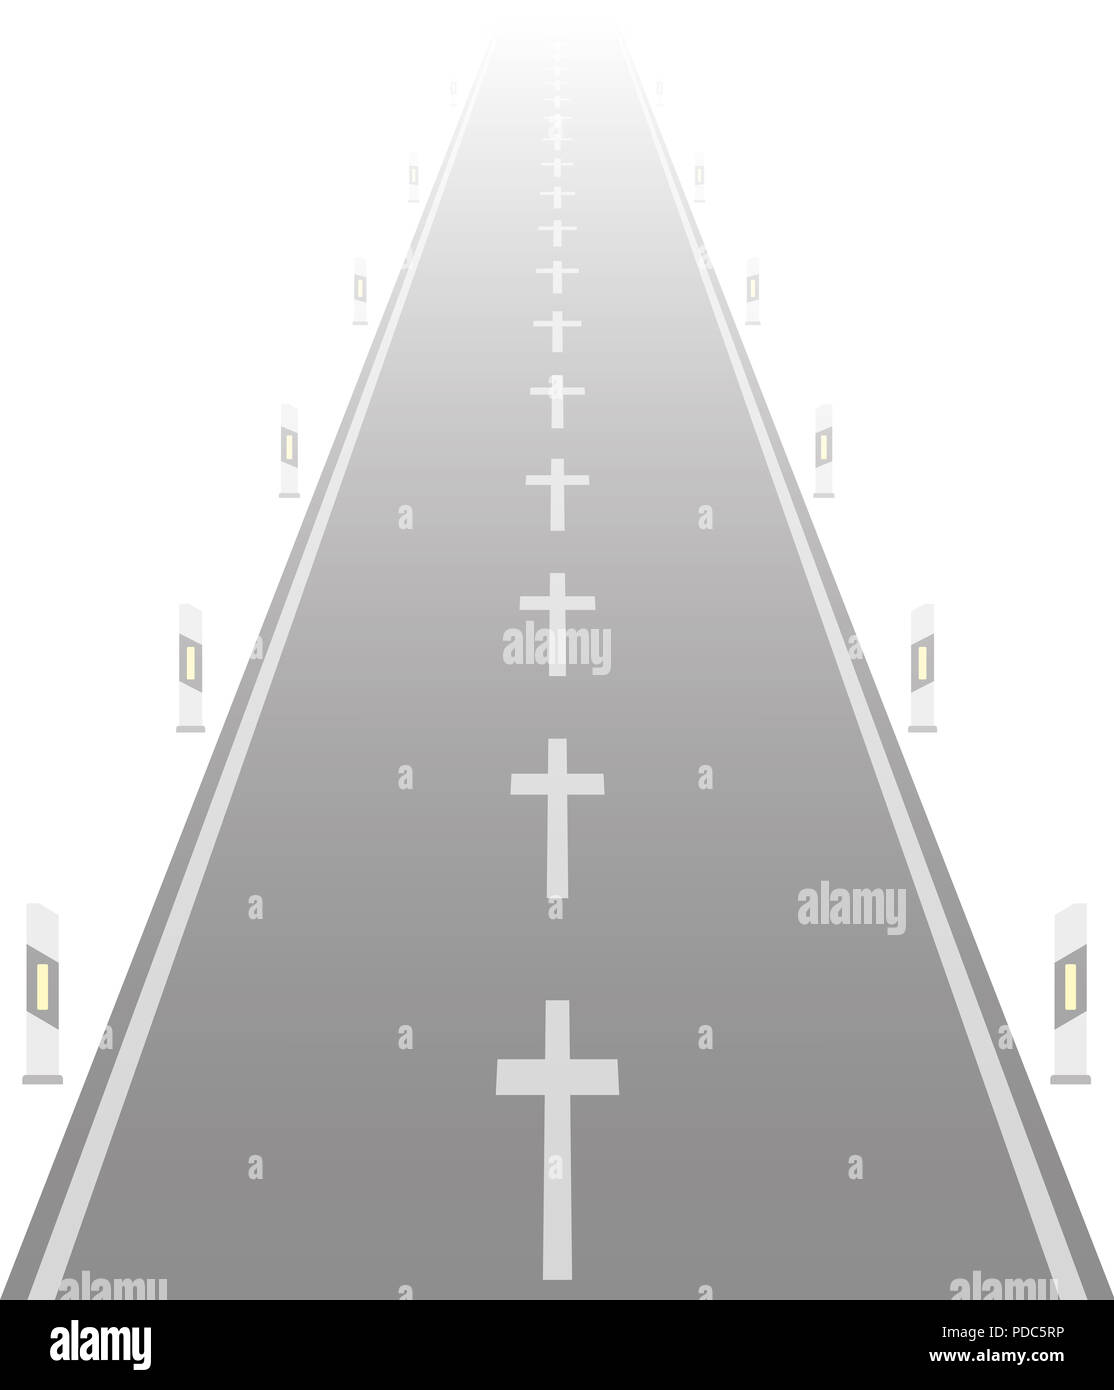 Street with crosses instead of a broken line. Symbolic for fatal accidents on the road. Stock Photo